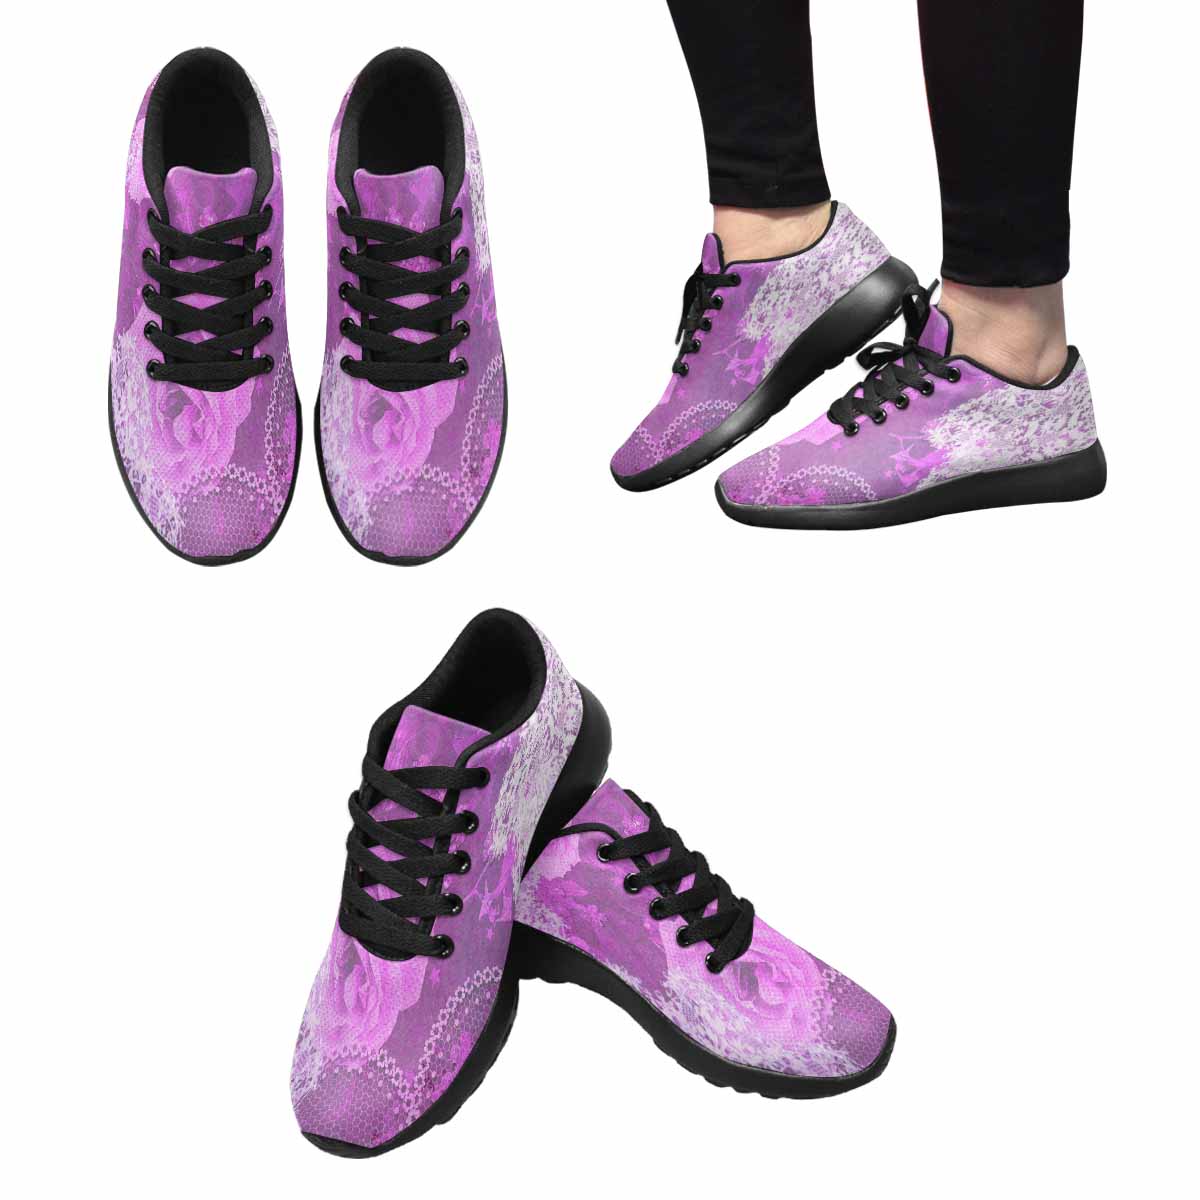 Victorian lace print, womens cute casual or running sneakers, design 03